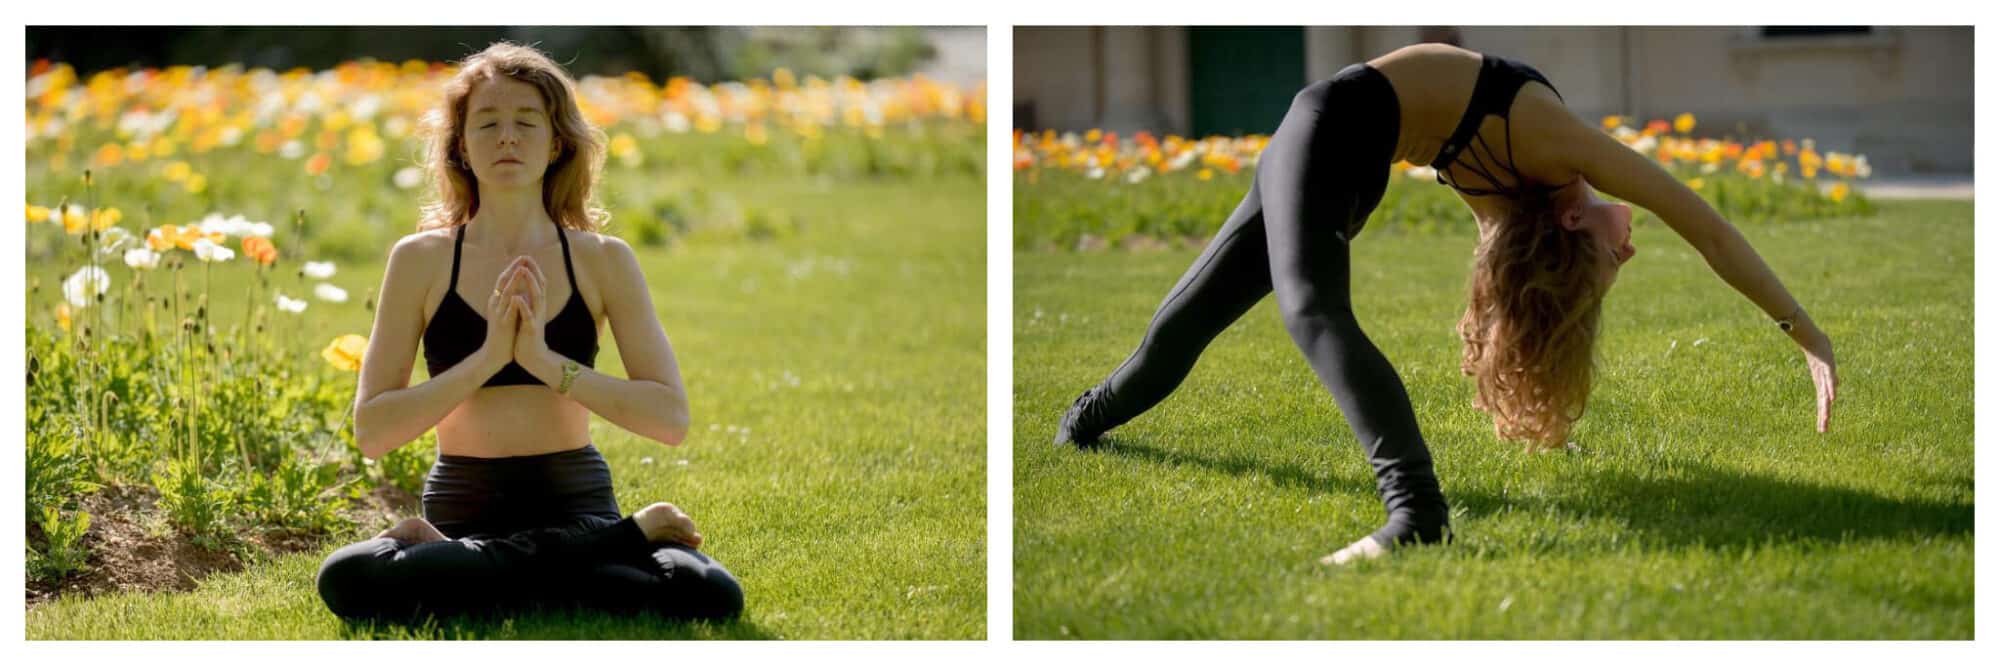 Left: a woman sits in lotus pose with hands in prayer, in front of flowers in full bloom.
Right: A woman does a backbend in font of a bed of flowers. 